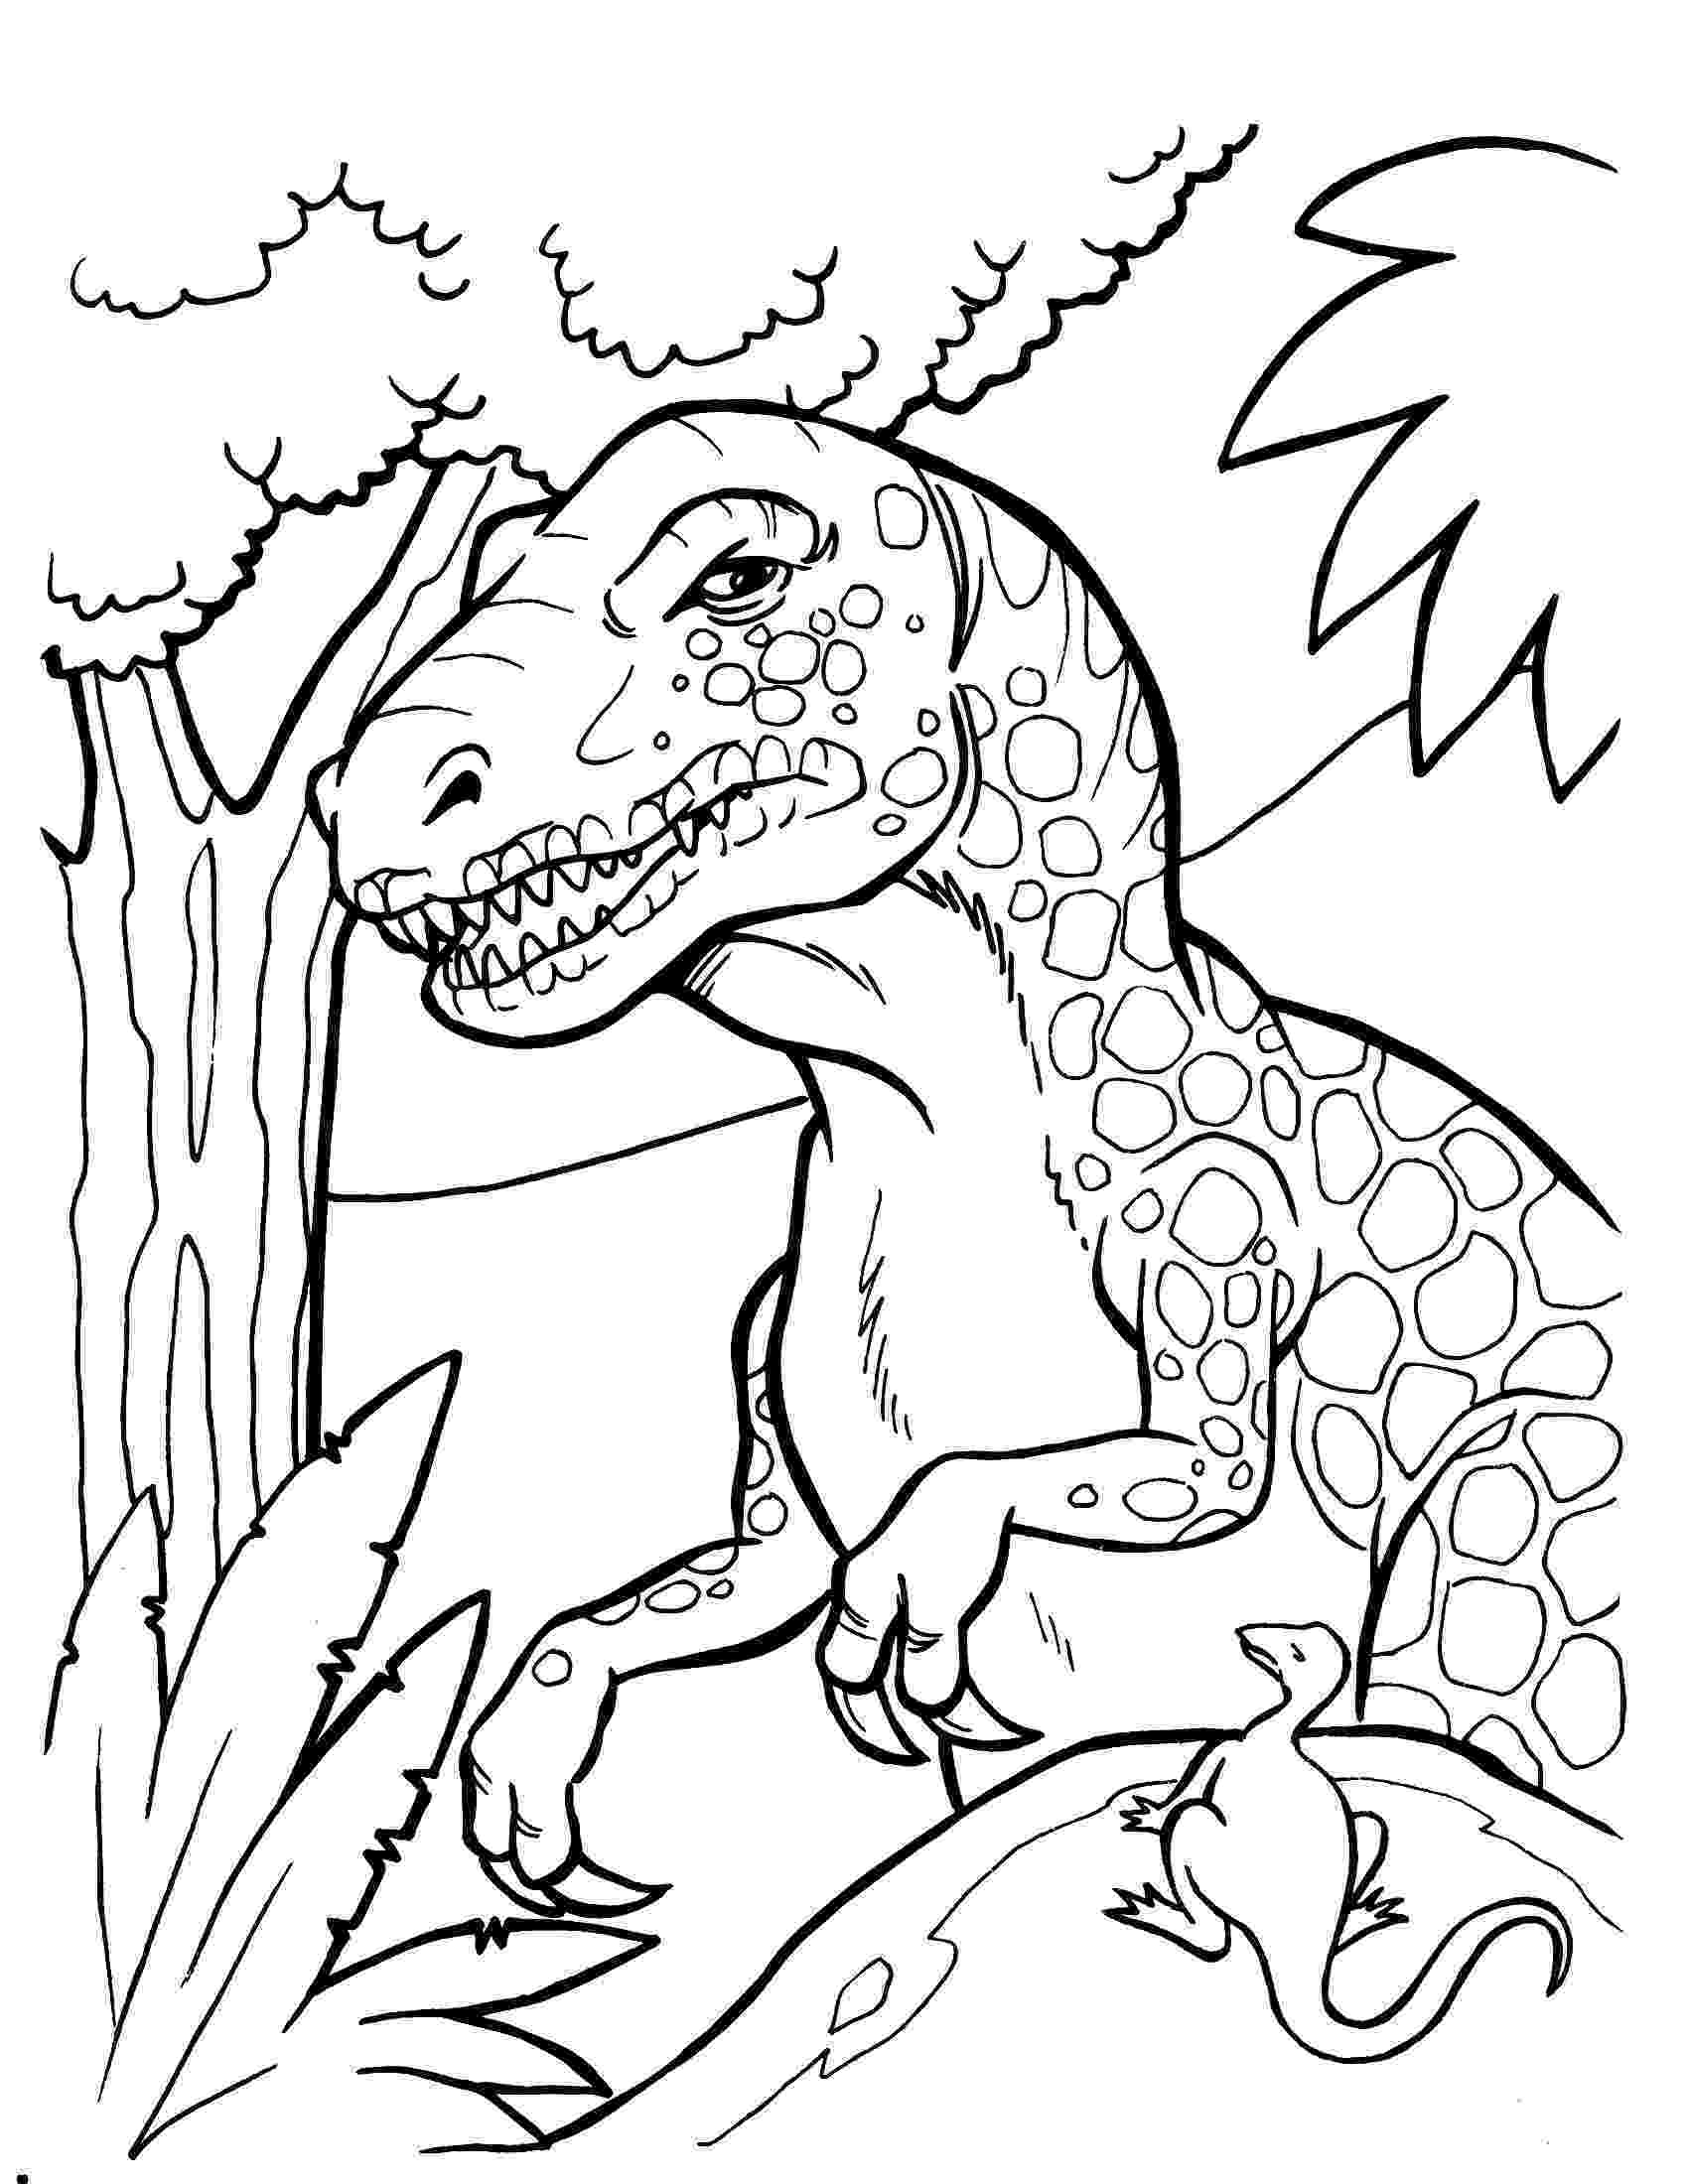 dinosaur coloring pages for toddlers dinosaurs free to color for kids tyrannosaur rex cartoon coloring for toddlers dinosaur pages 